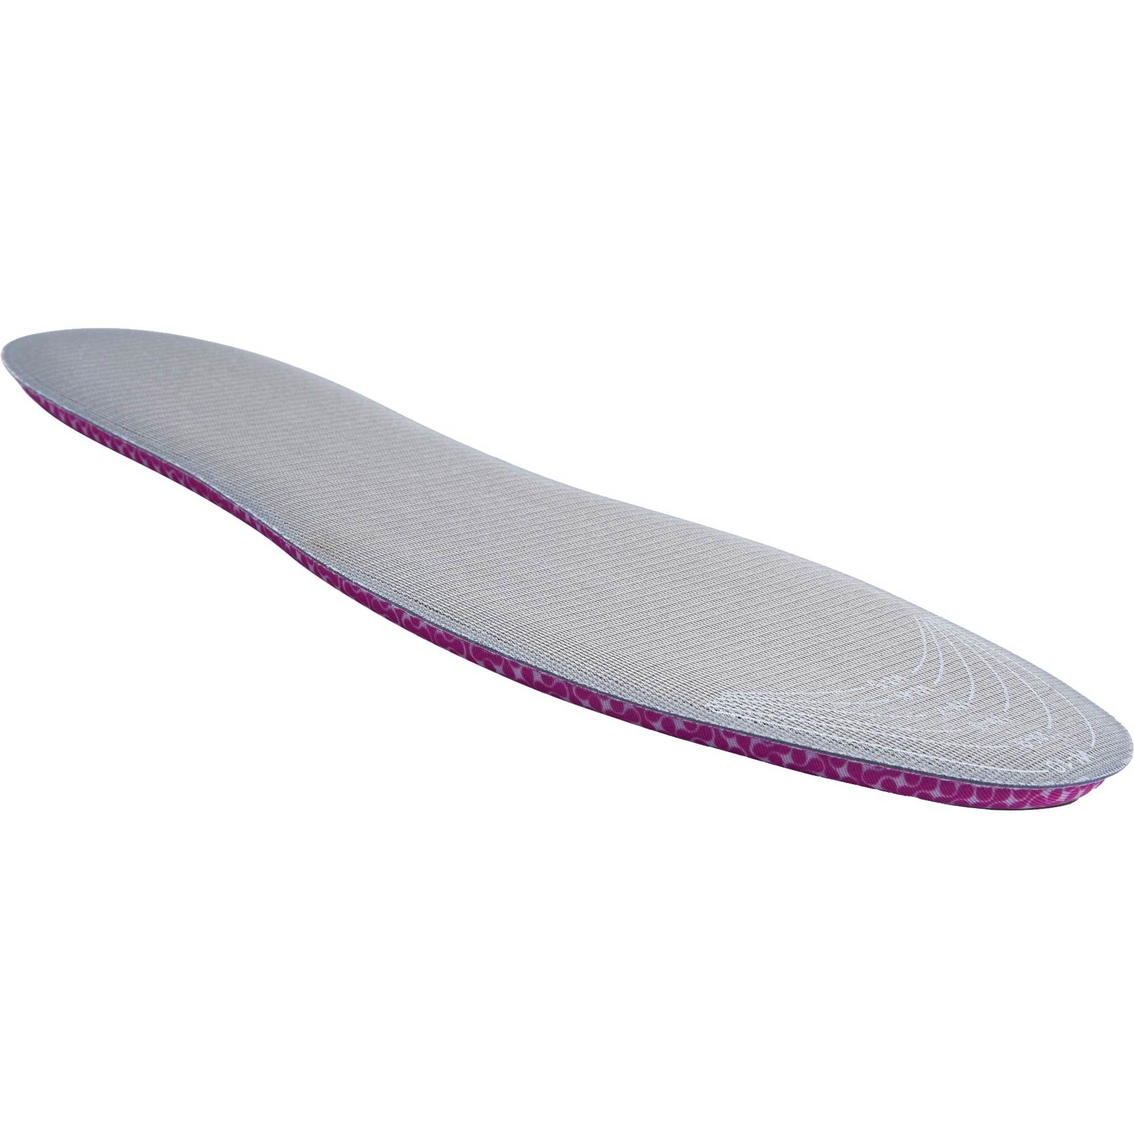 Airplus Women's Memory Comfort Shoe Insoles for Pressure Relief, Size 7 to 13 - Image 7 of 7